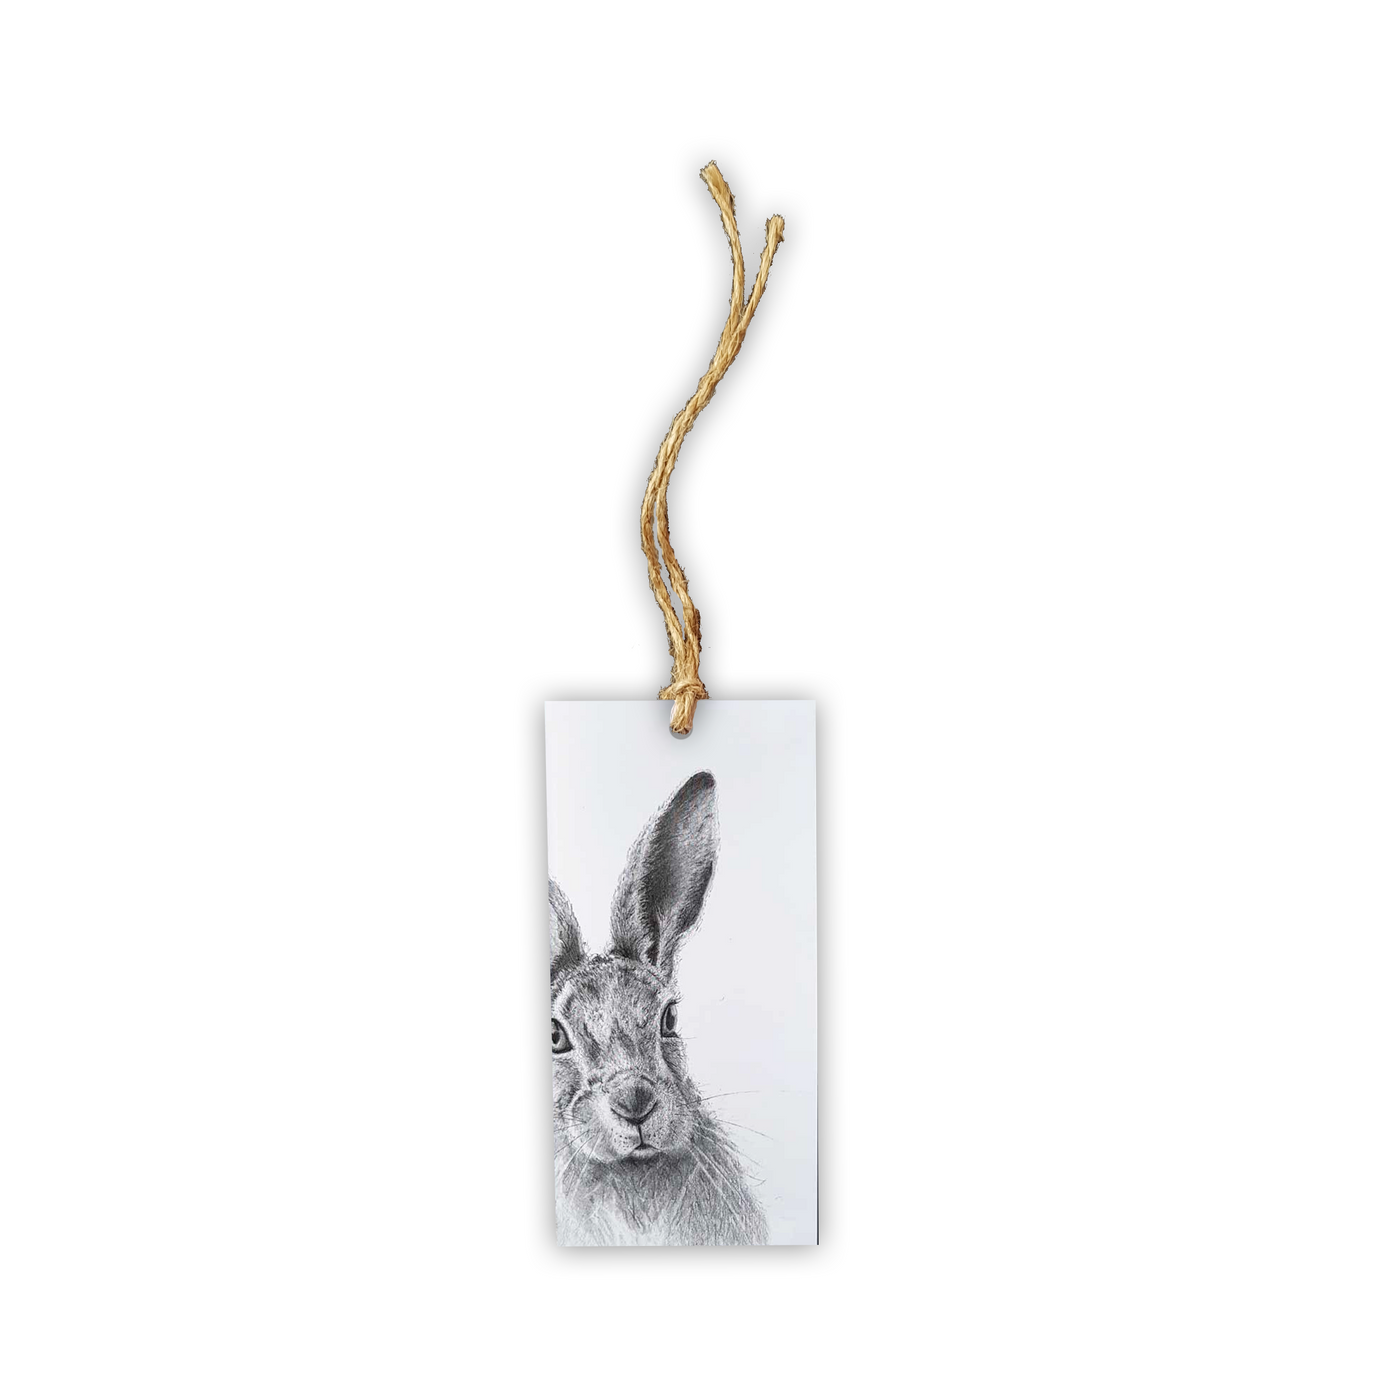 Hare Tag - Wholesale